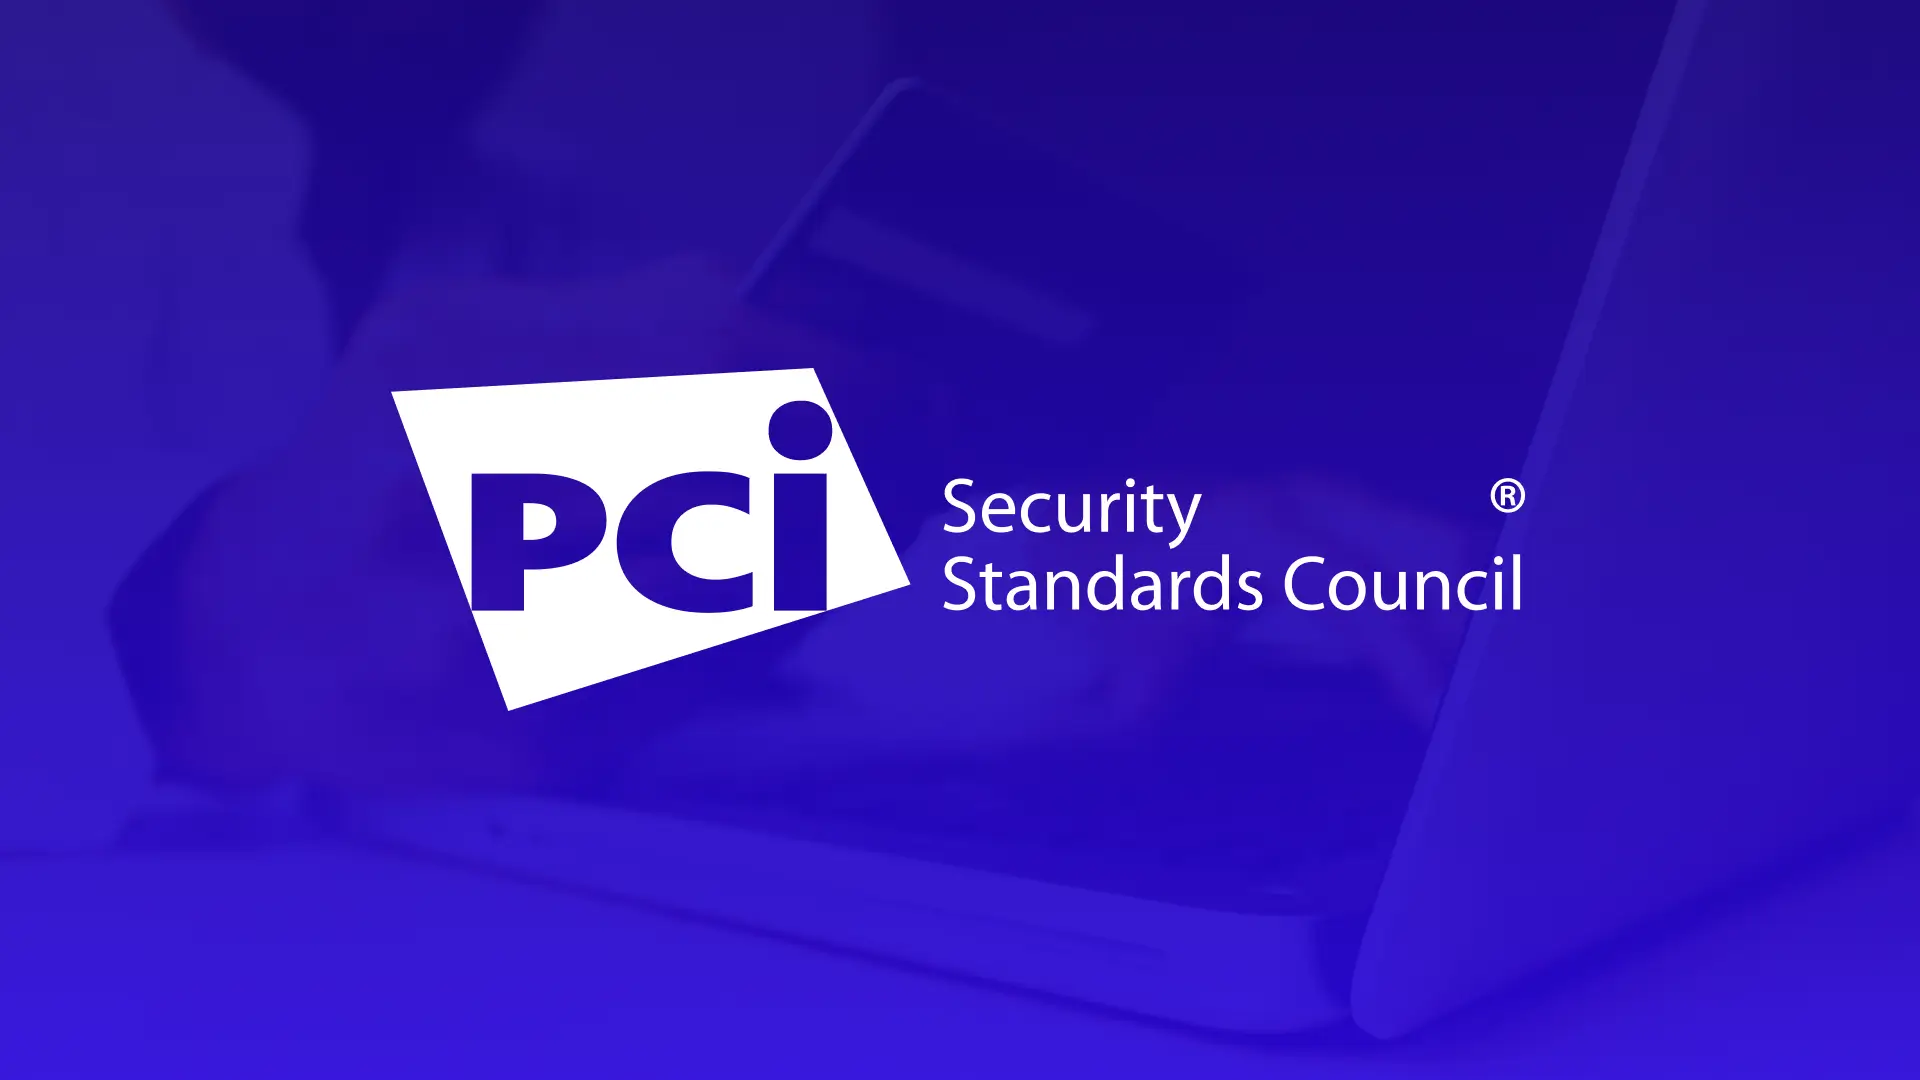 A person making an online payment, and the logo of the PCI Security Standards Council